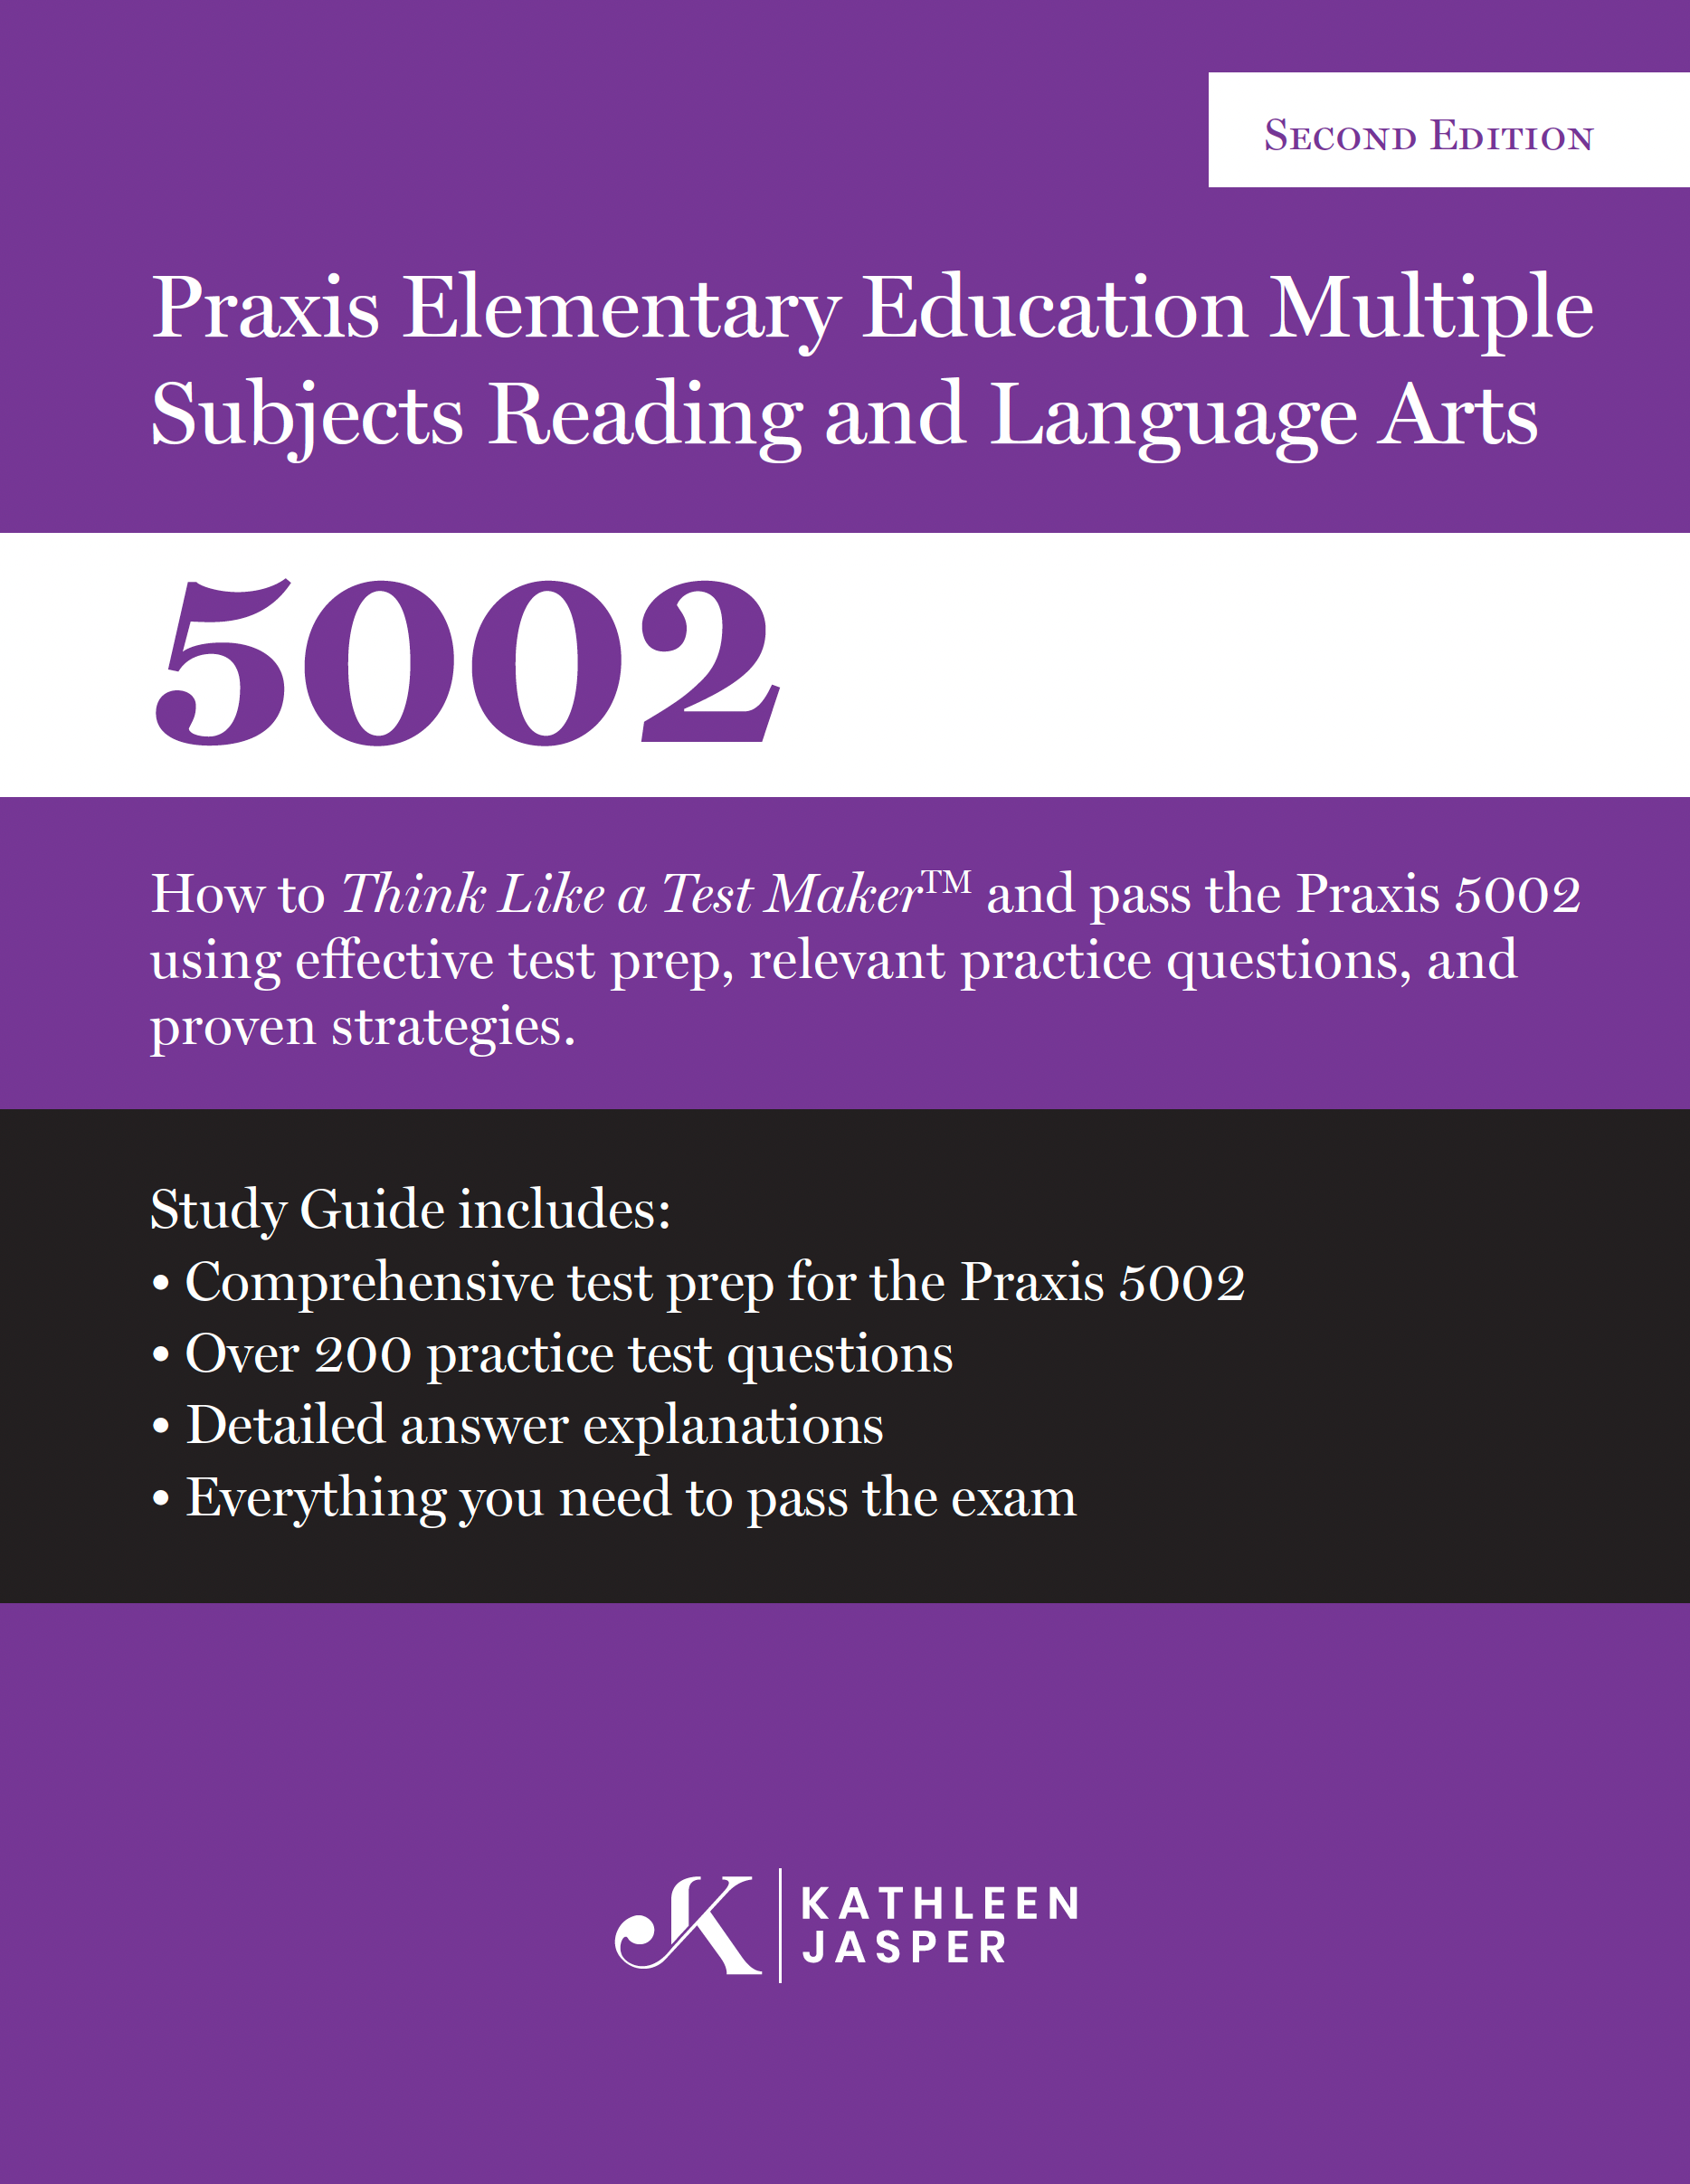 Praxis Elementary Education Multiple Subjects Reading and Language Arts 5002